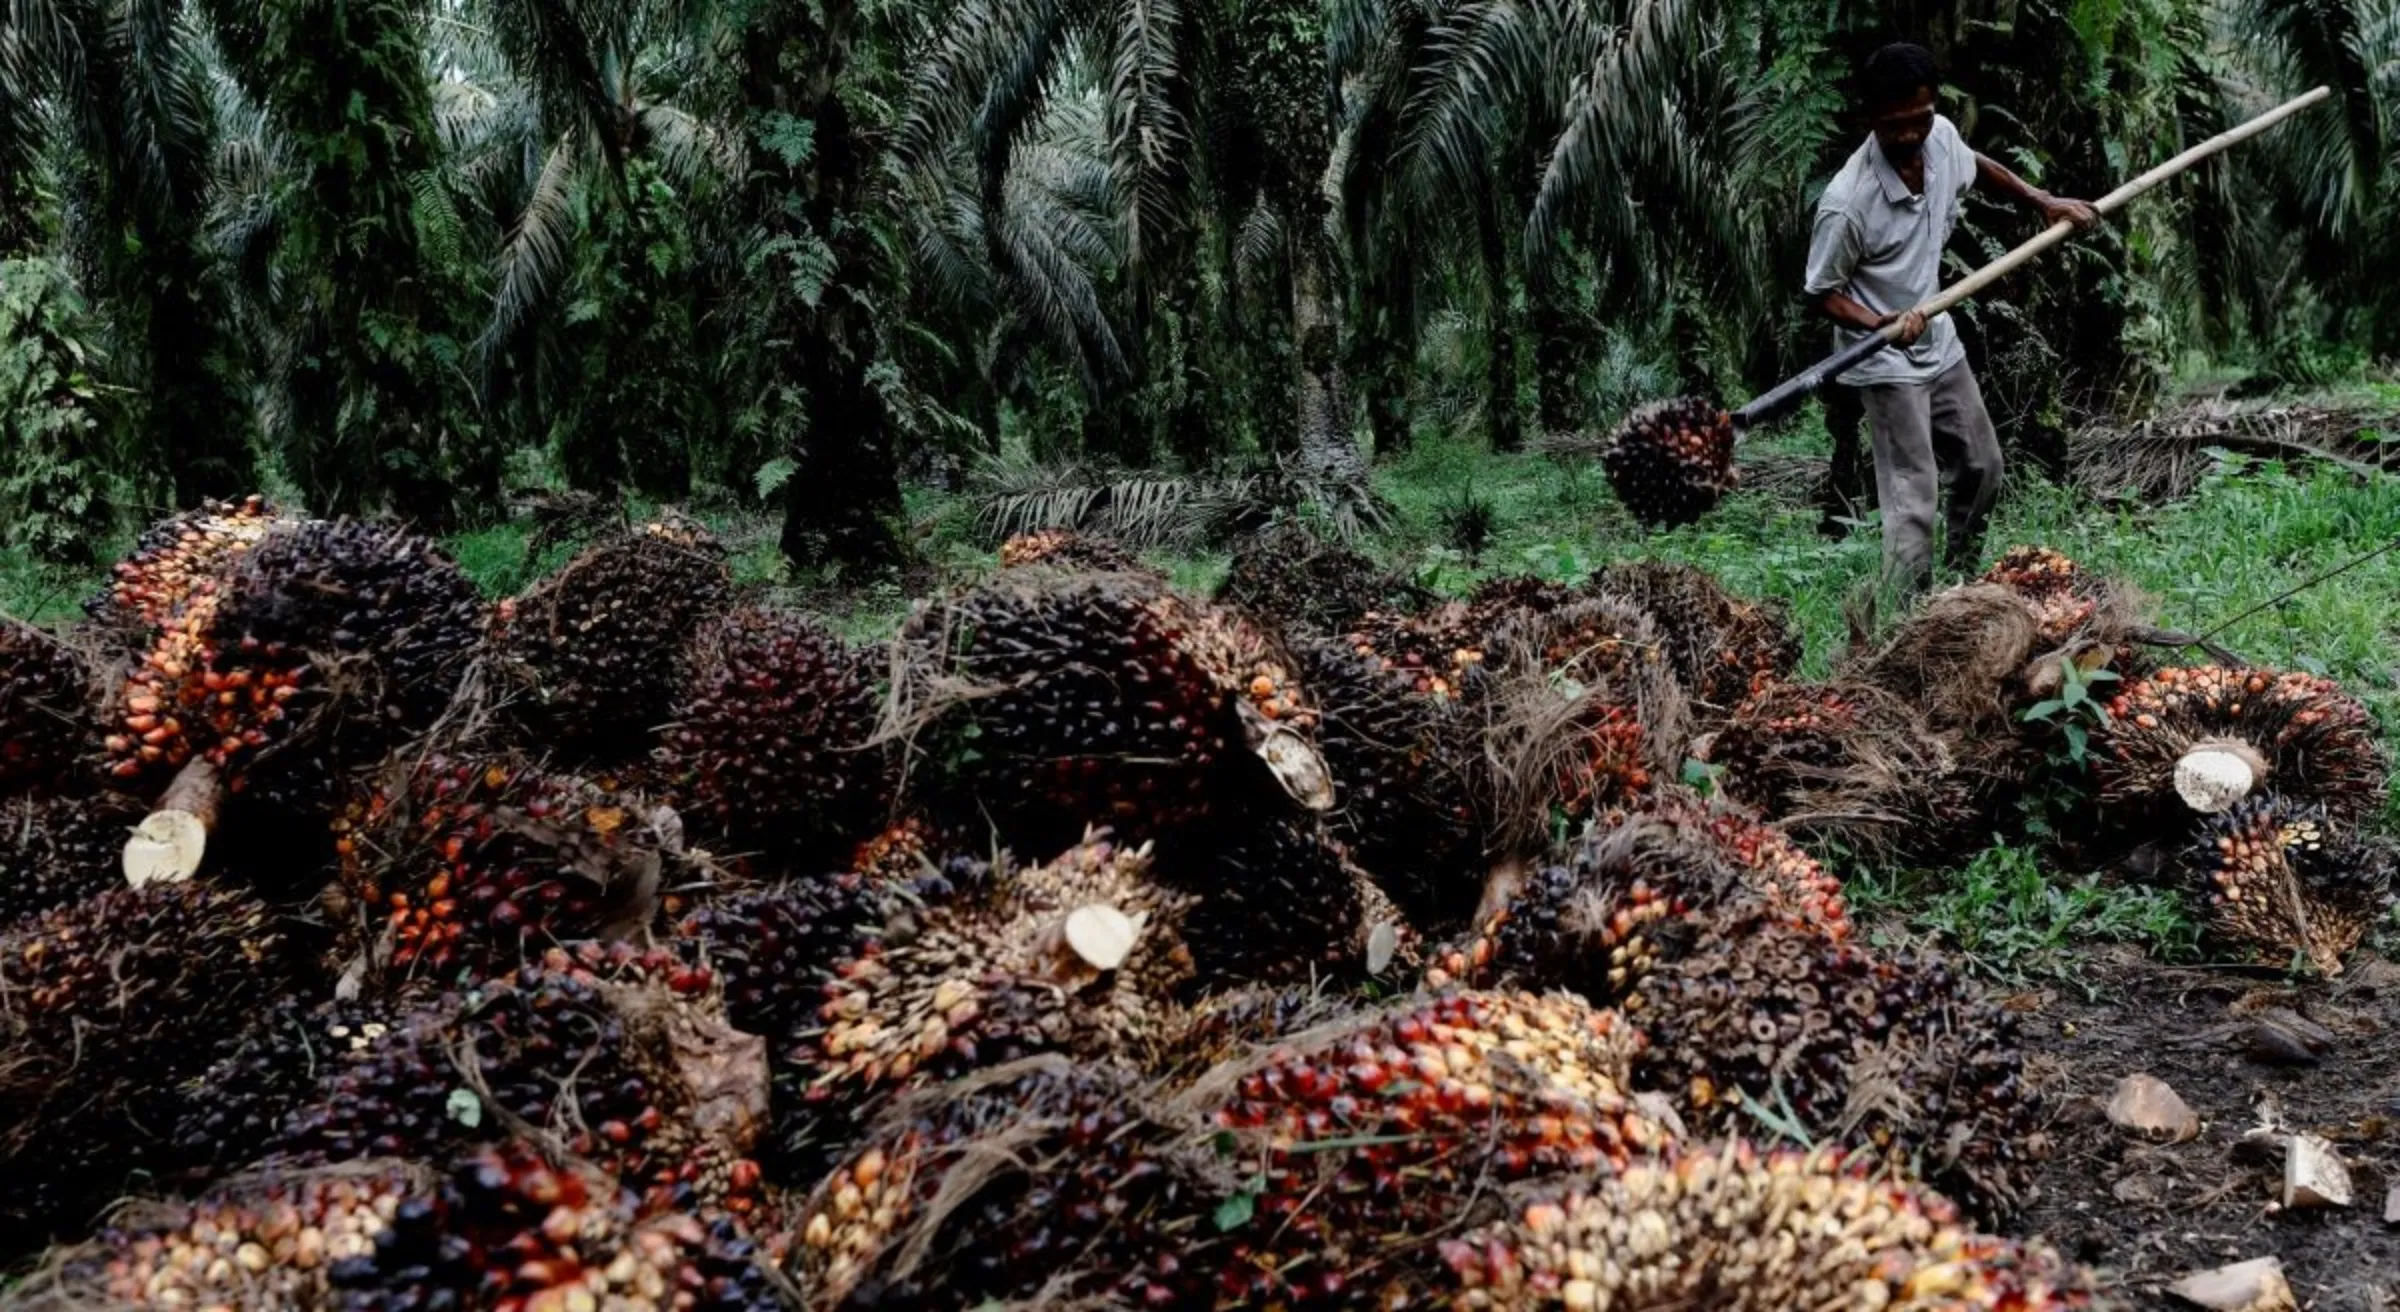 Palm oil watchdog adds new targets: climate emissions, small farms